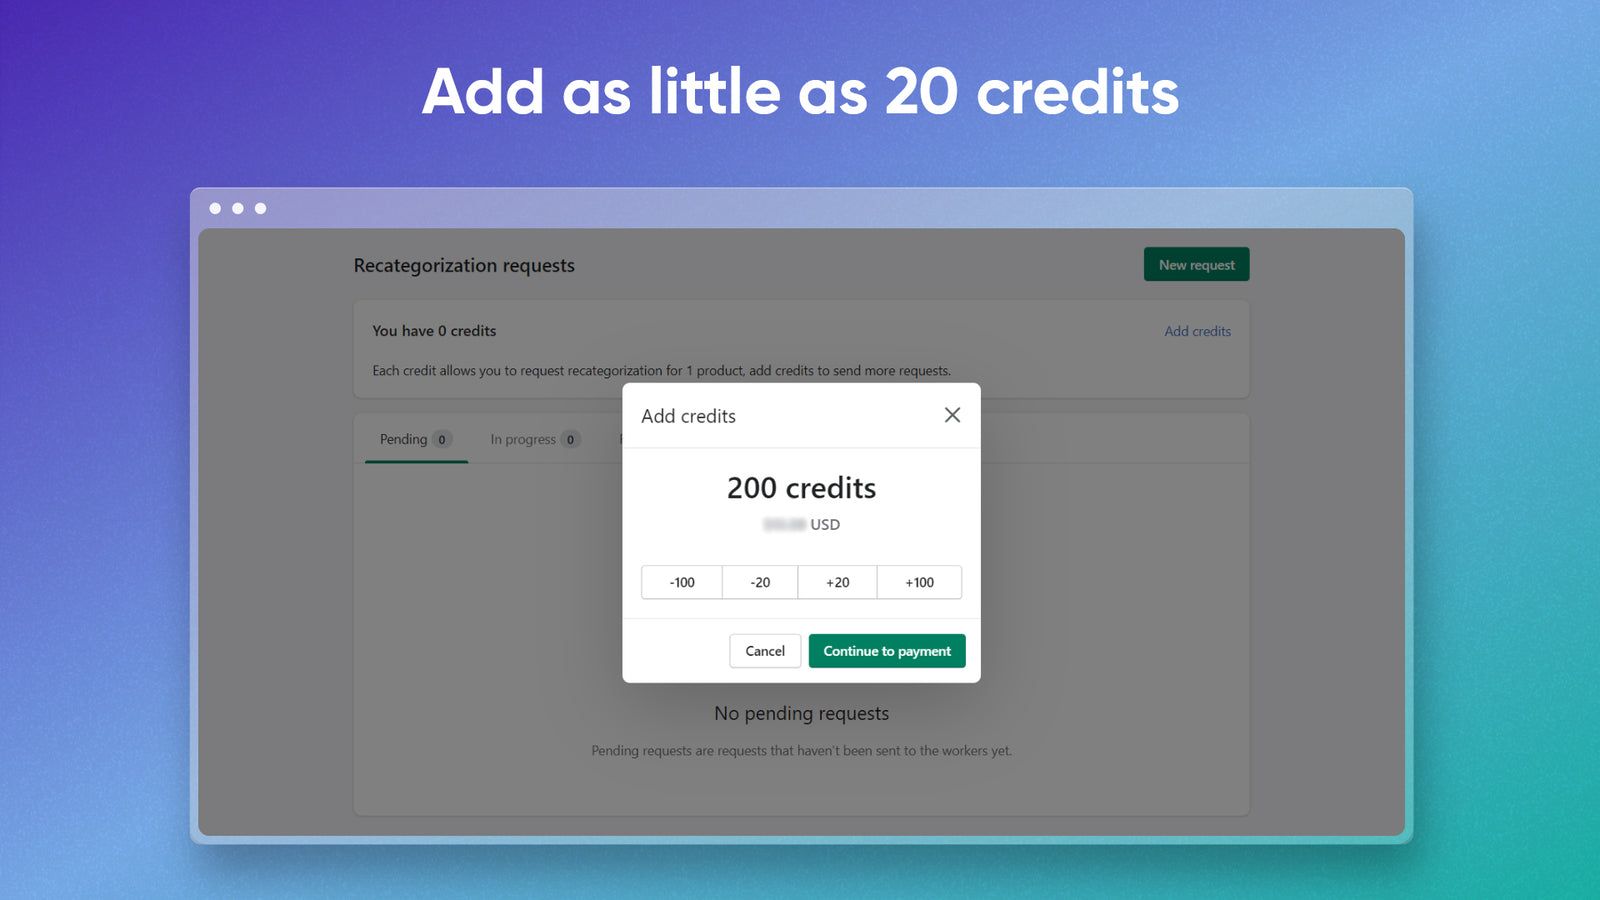 Add as little as 20 credits